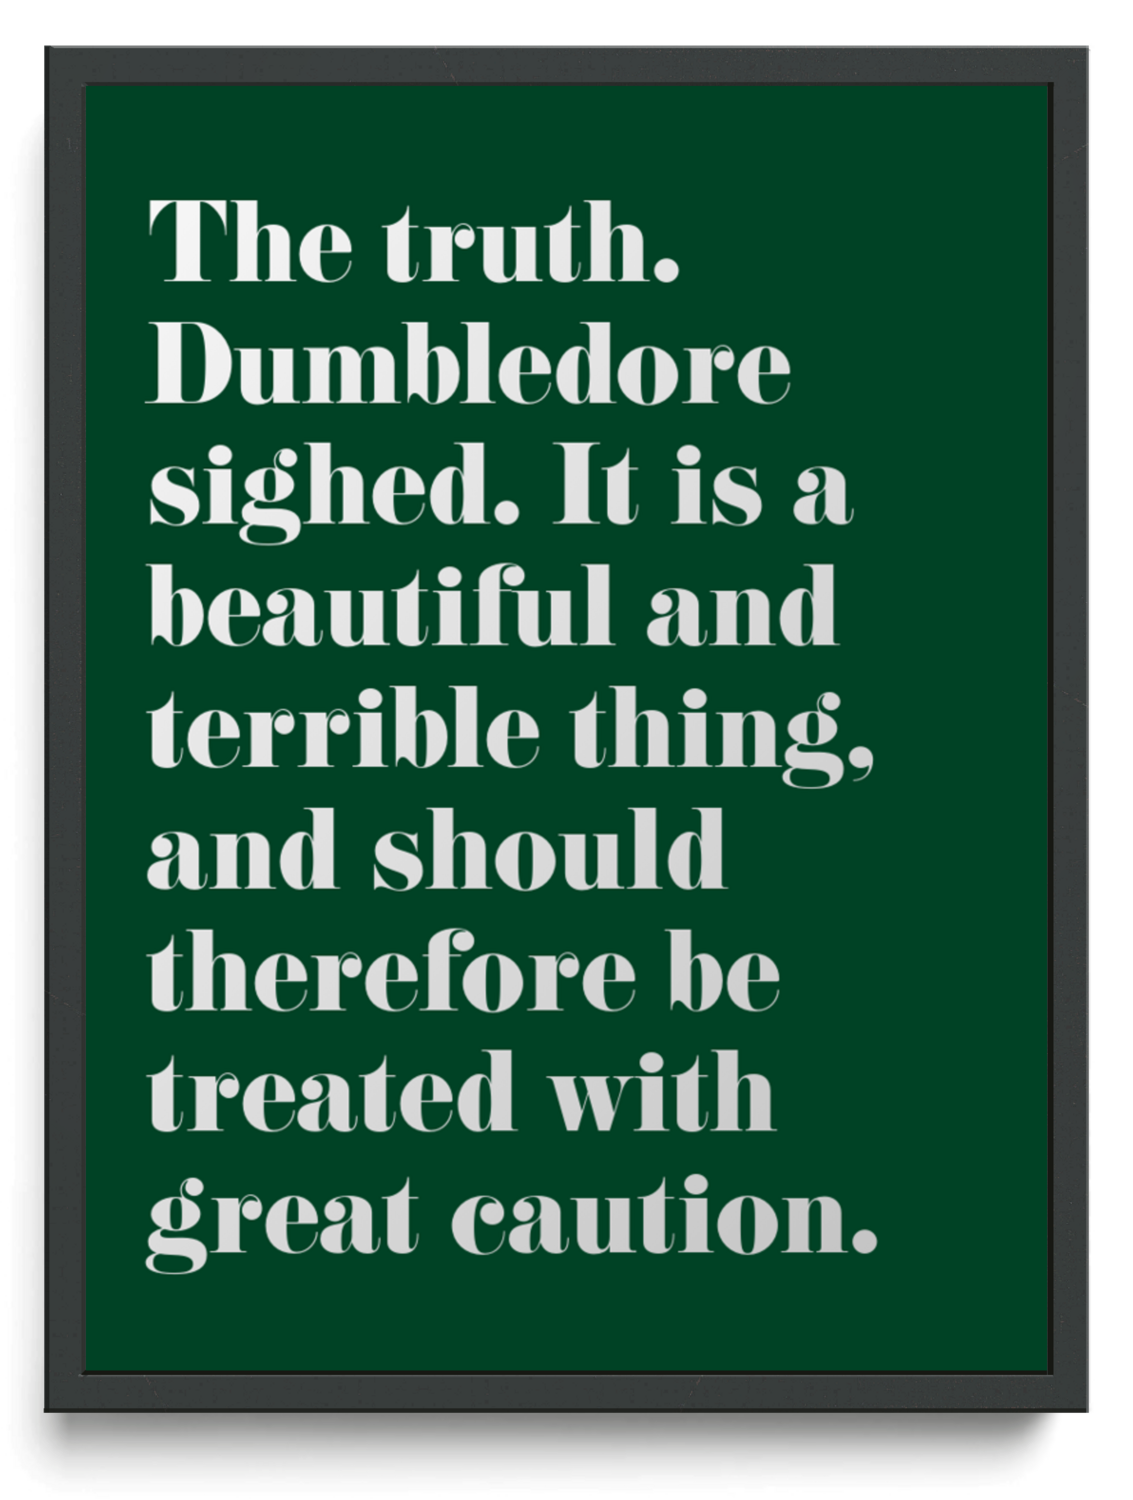 The truth. Dumbledore sighed. It is a beautiful and terrible thing, and should therefore be treated with great caution. framed typographic print